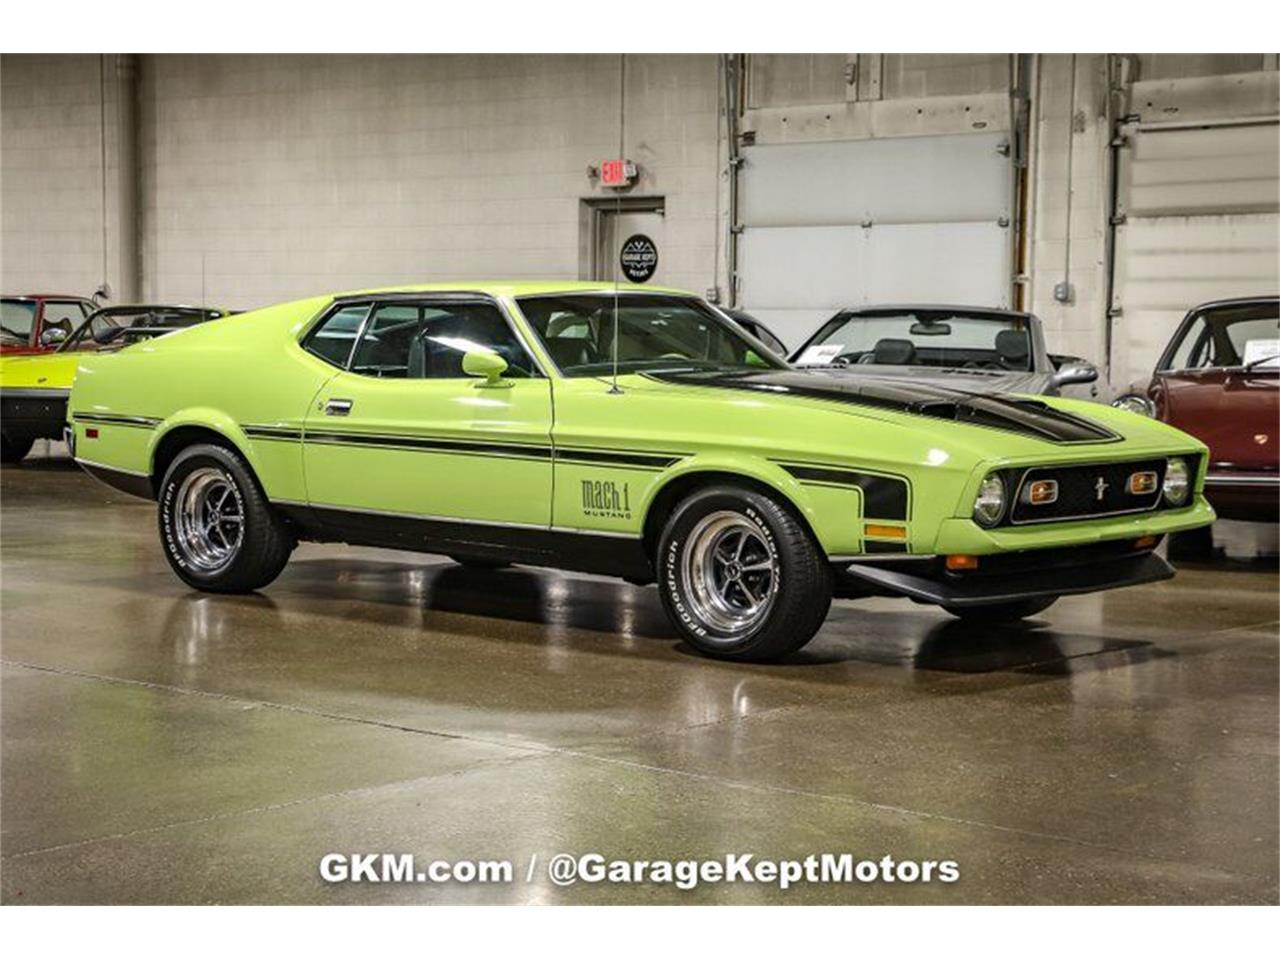 For Sale: 1971 Ford Mustang in Grand Rapids, Michigan for sale in Grand Rapids, MI